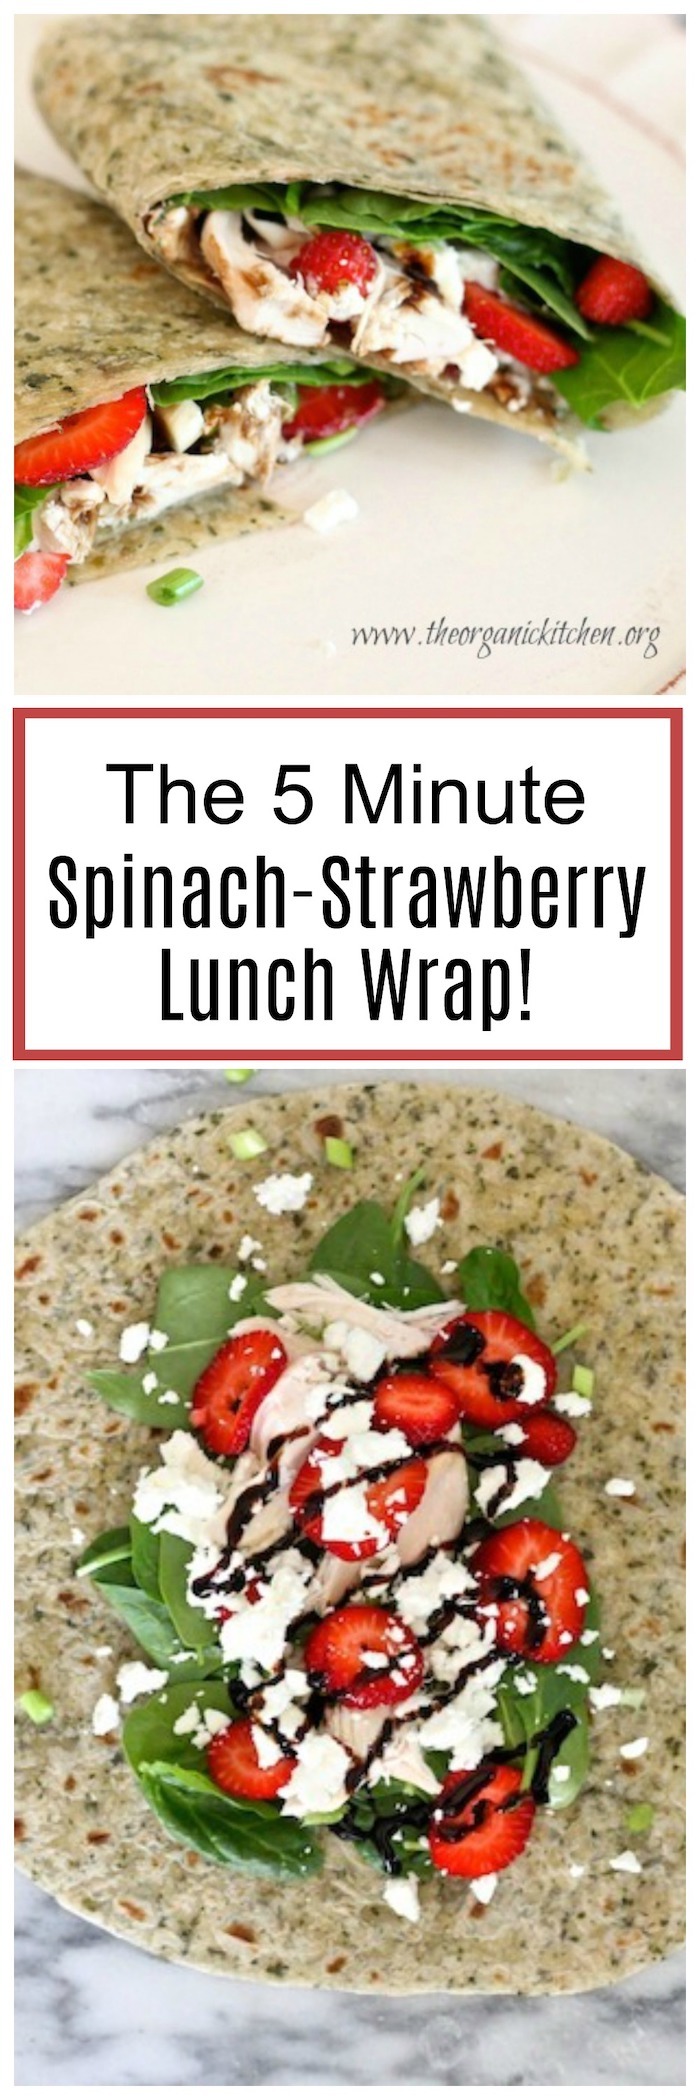 Spinach Strawberry Salad Wrap on white plate